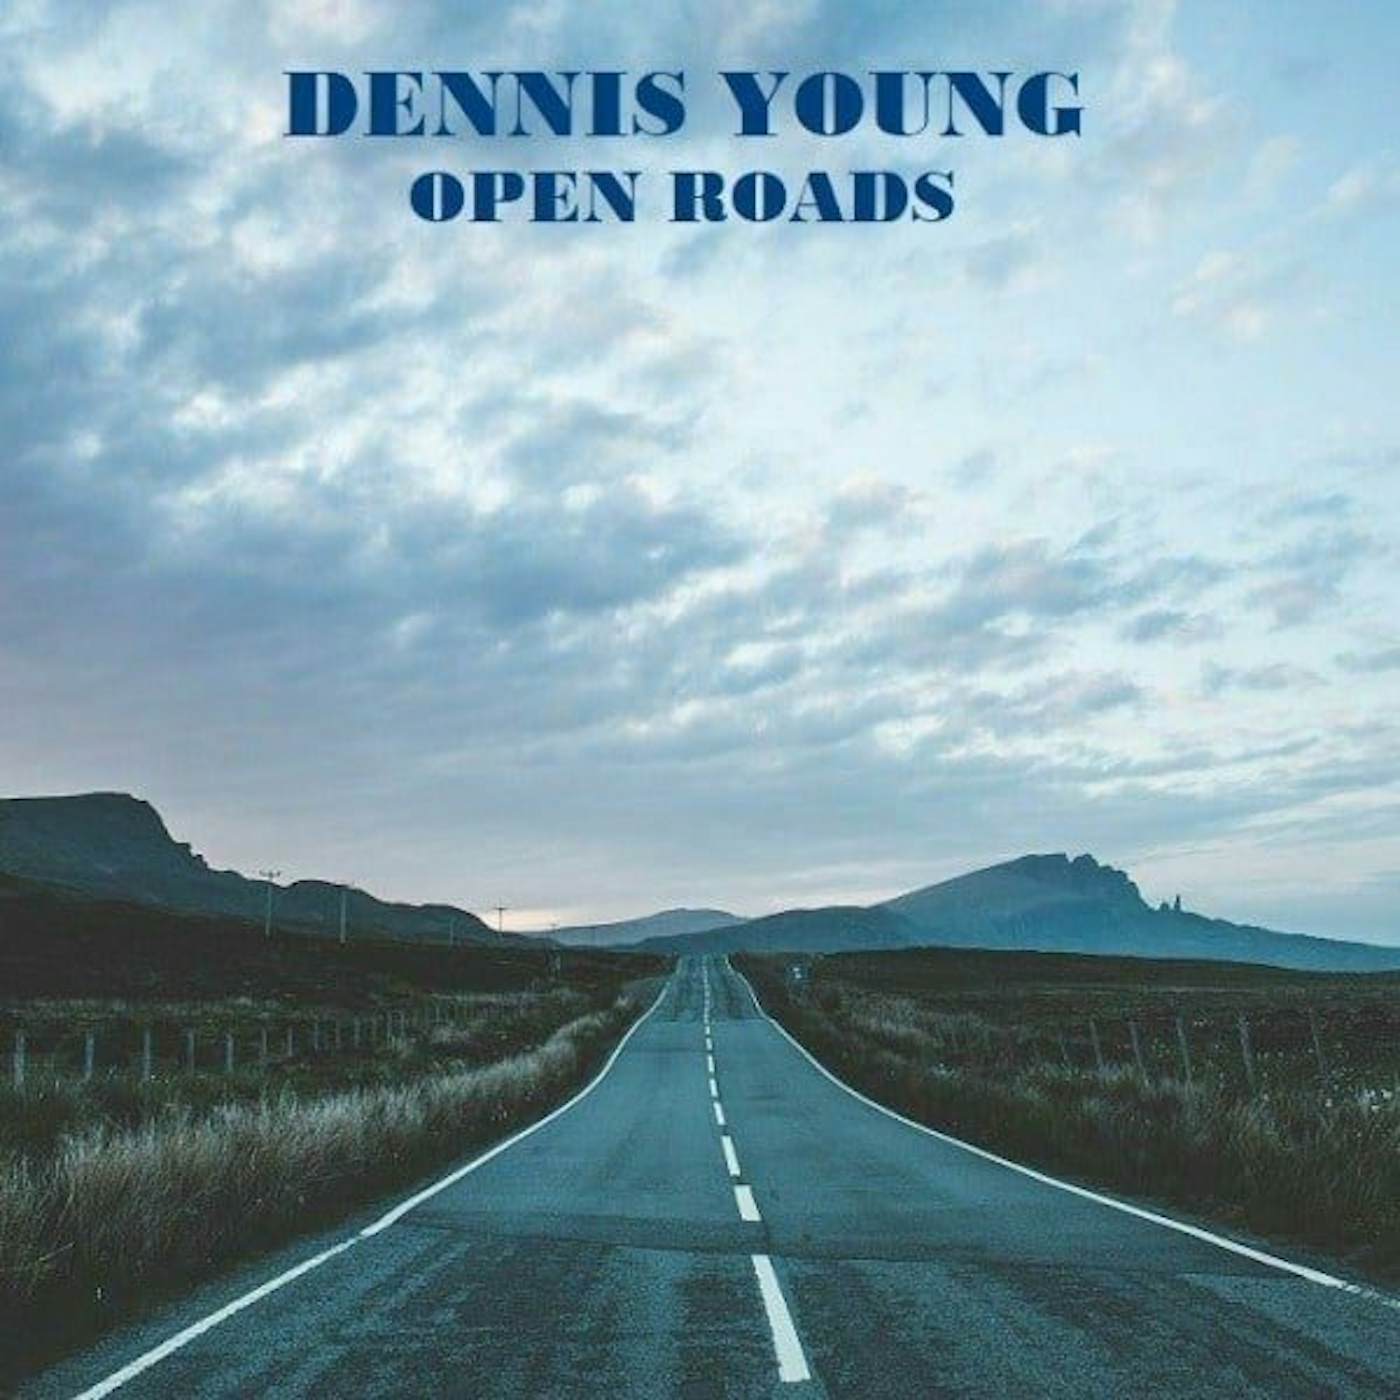 Dennis Young OPEN ROADS Vinyl Record